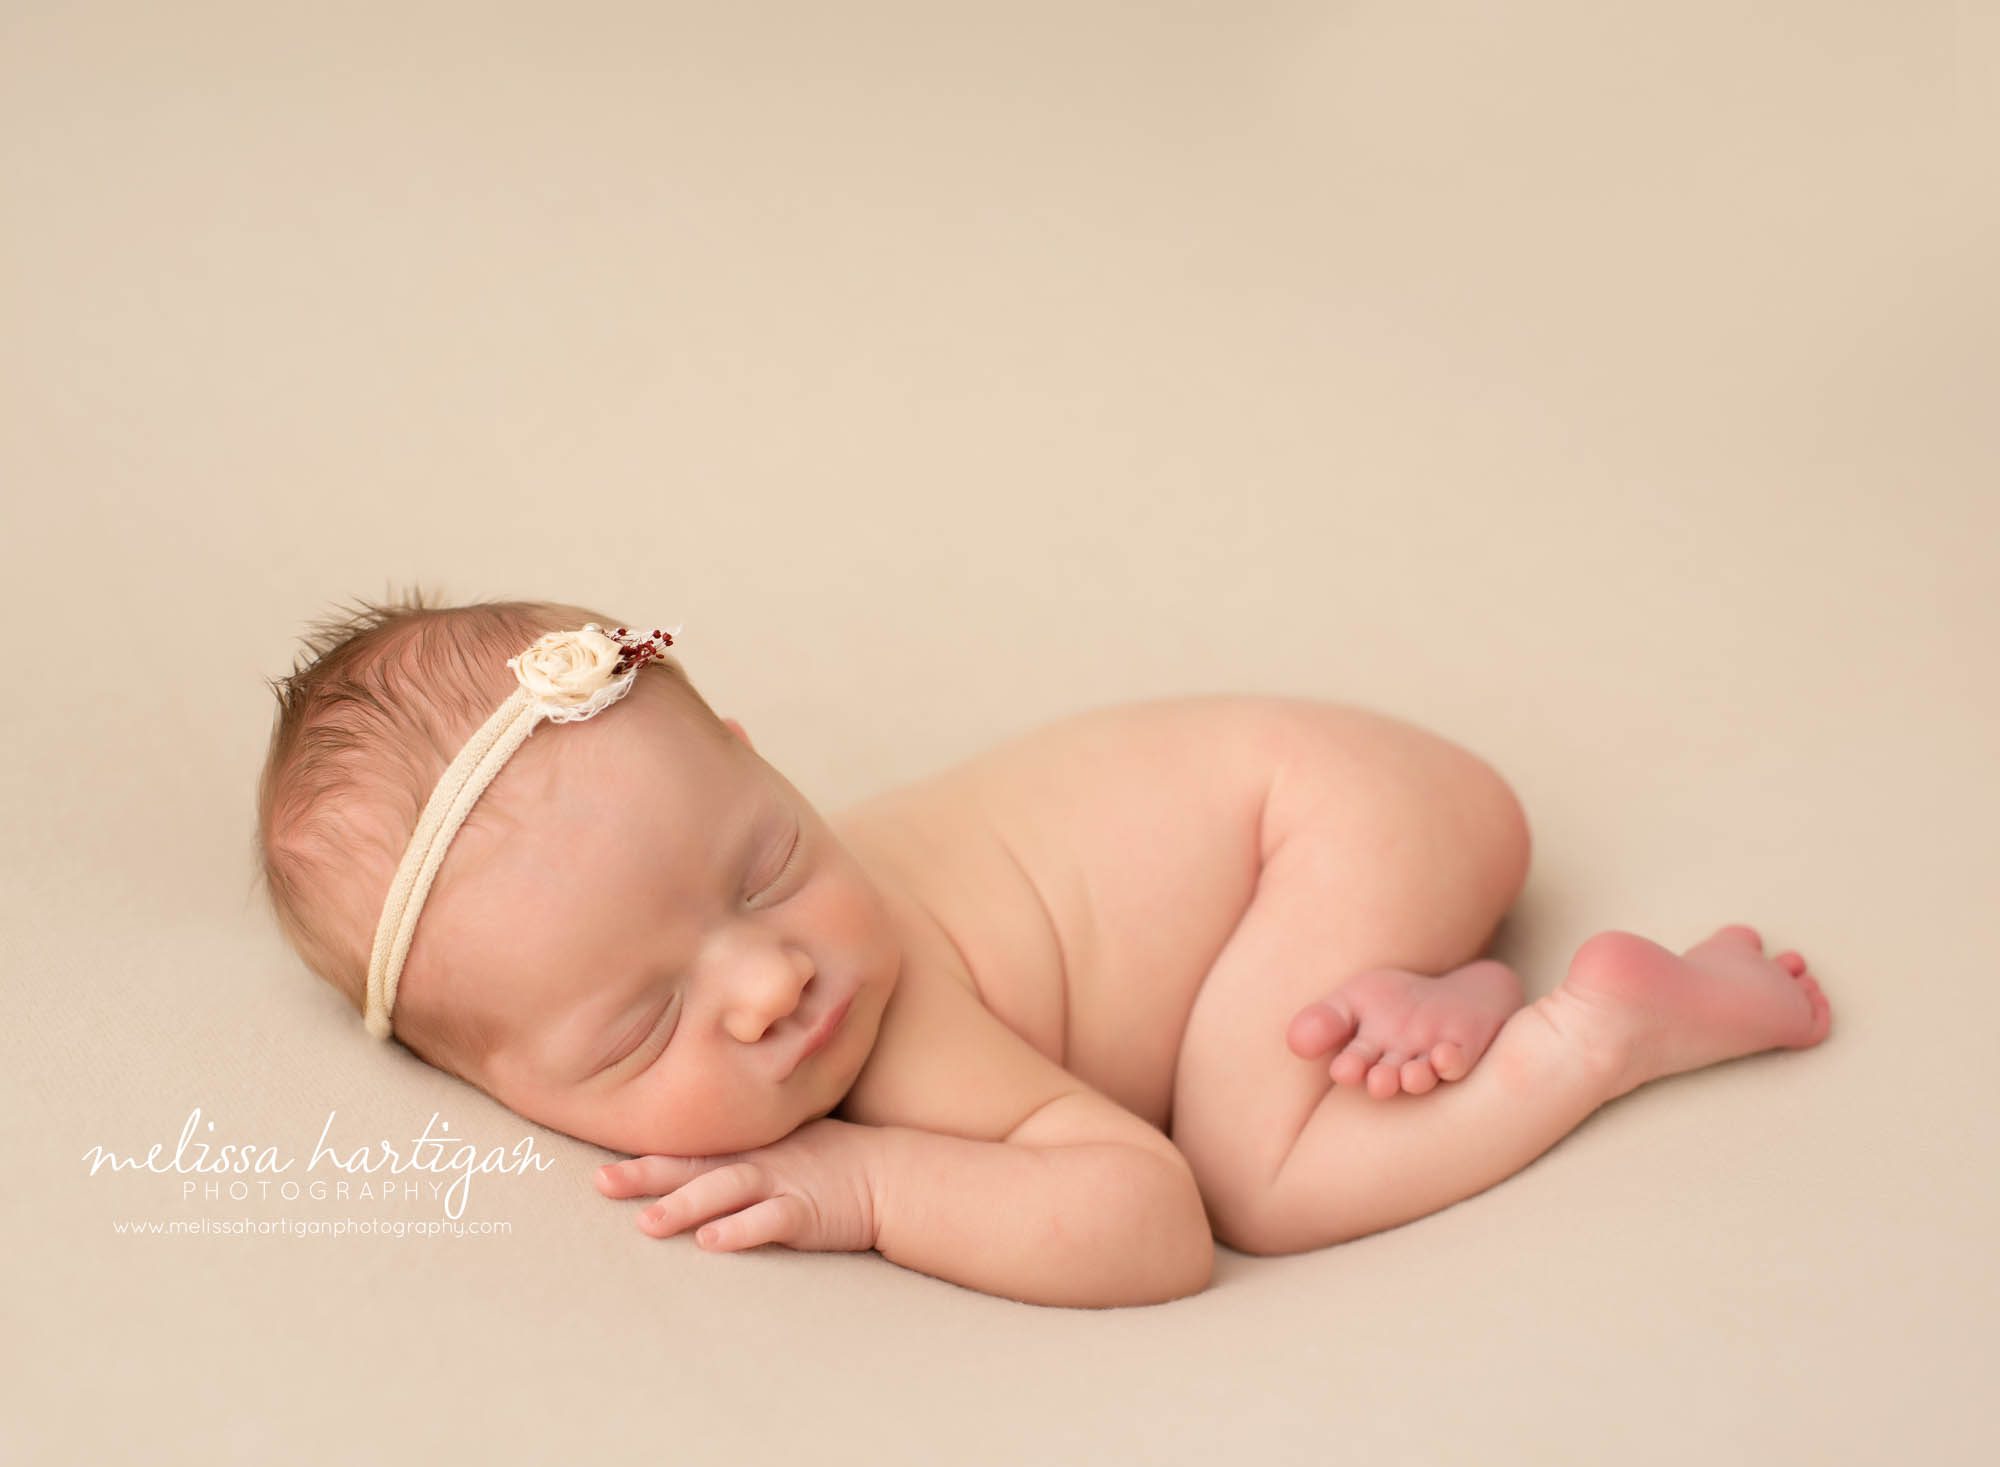 Newbonr baby girl posed on side with bum up wearing cream headband with flower Connecticut newborn photographer